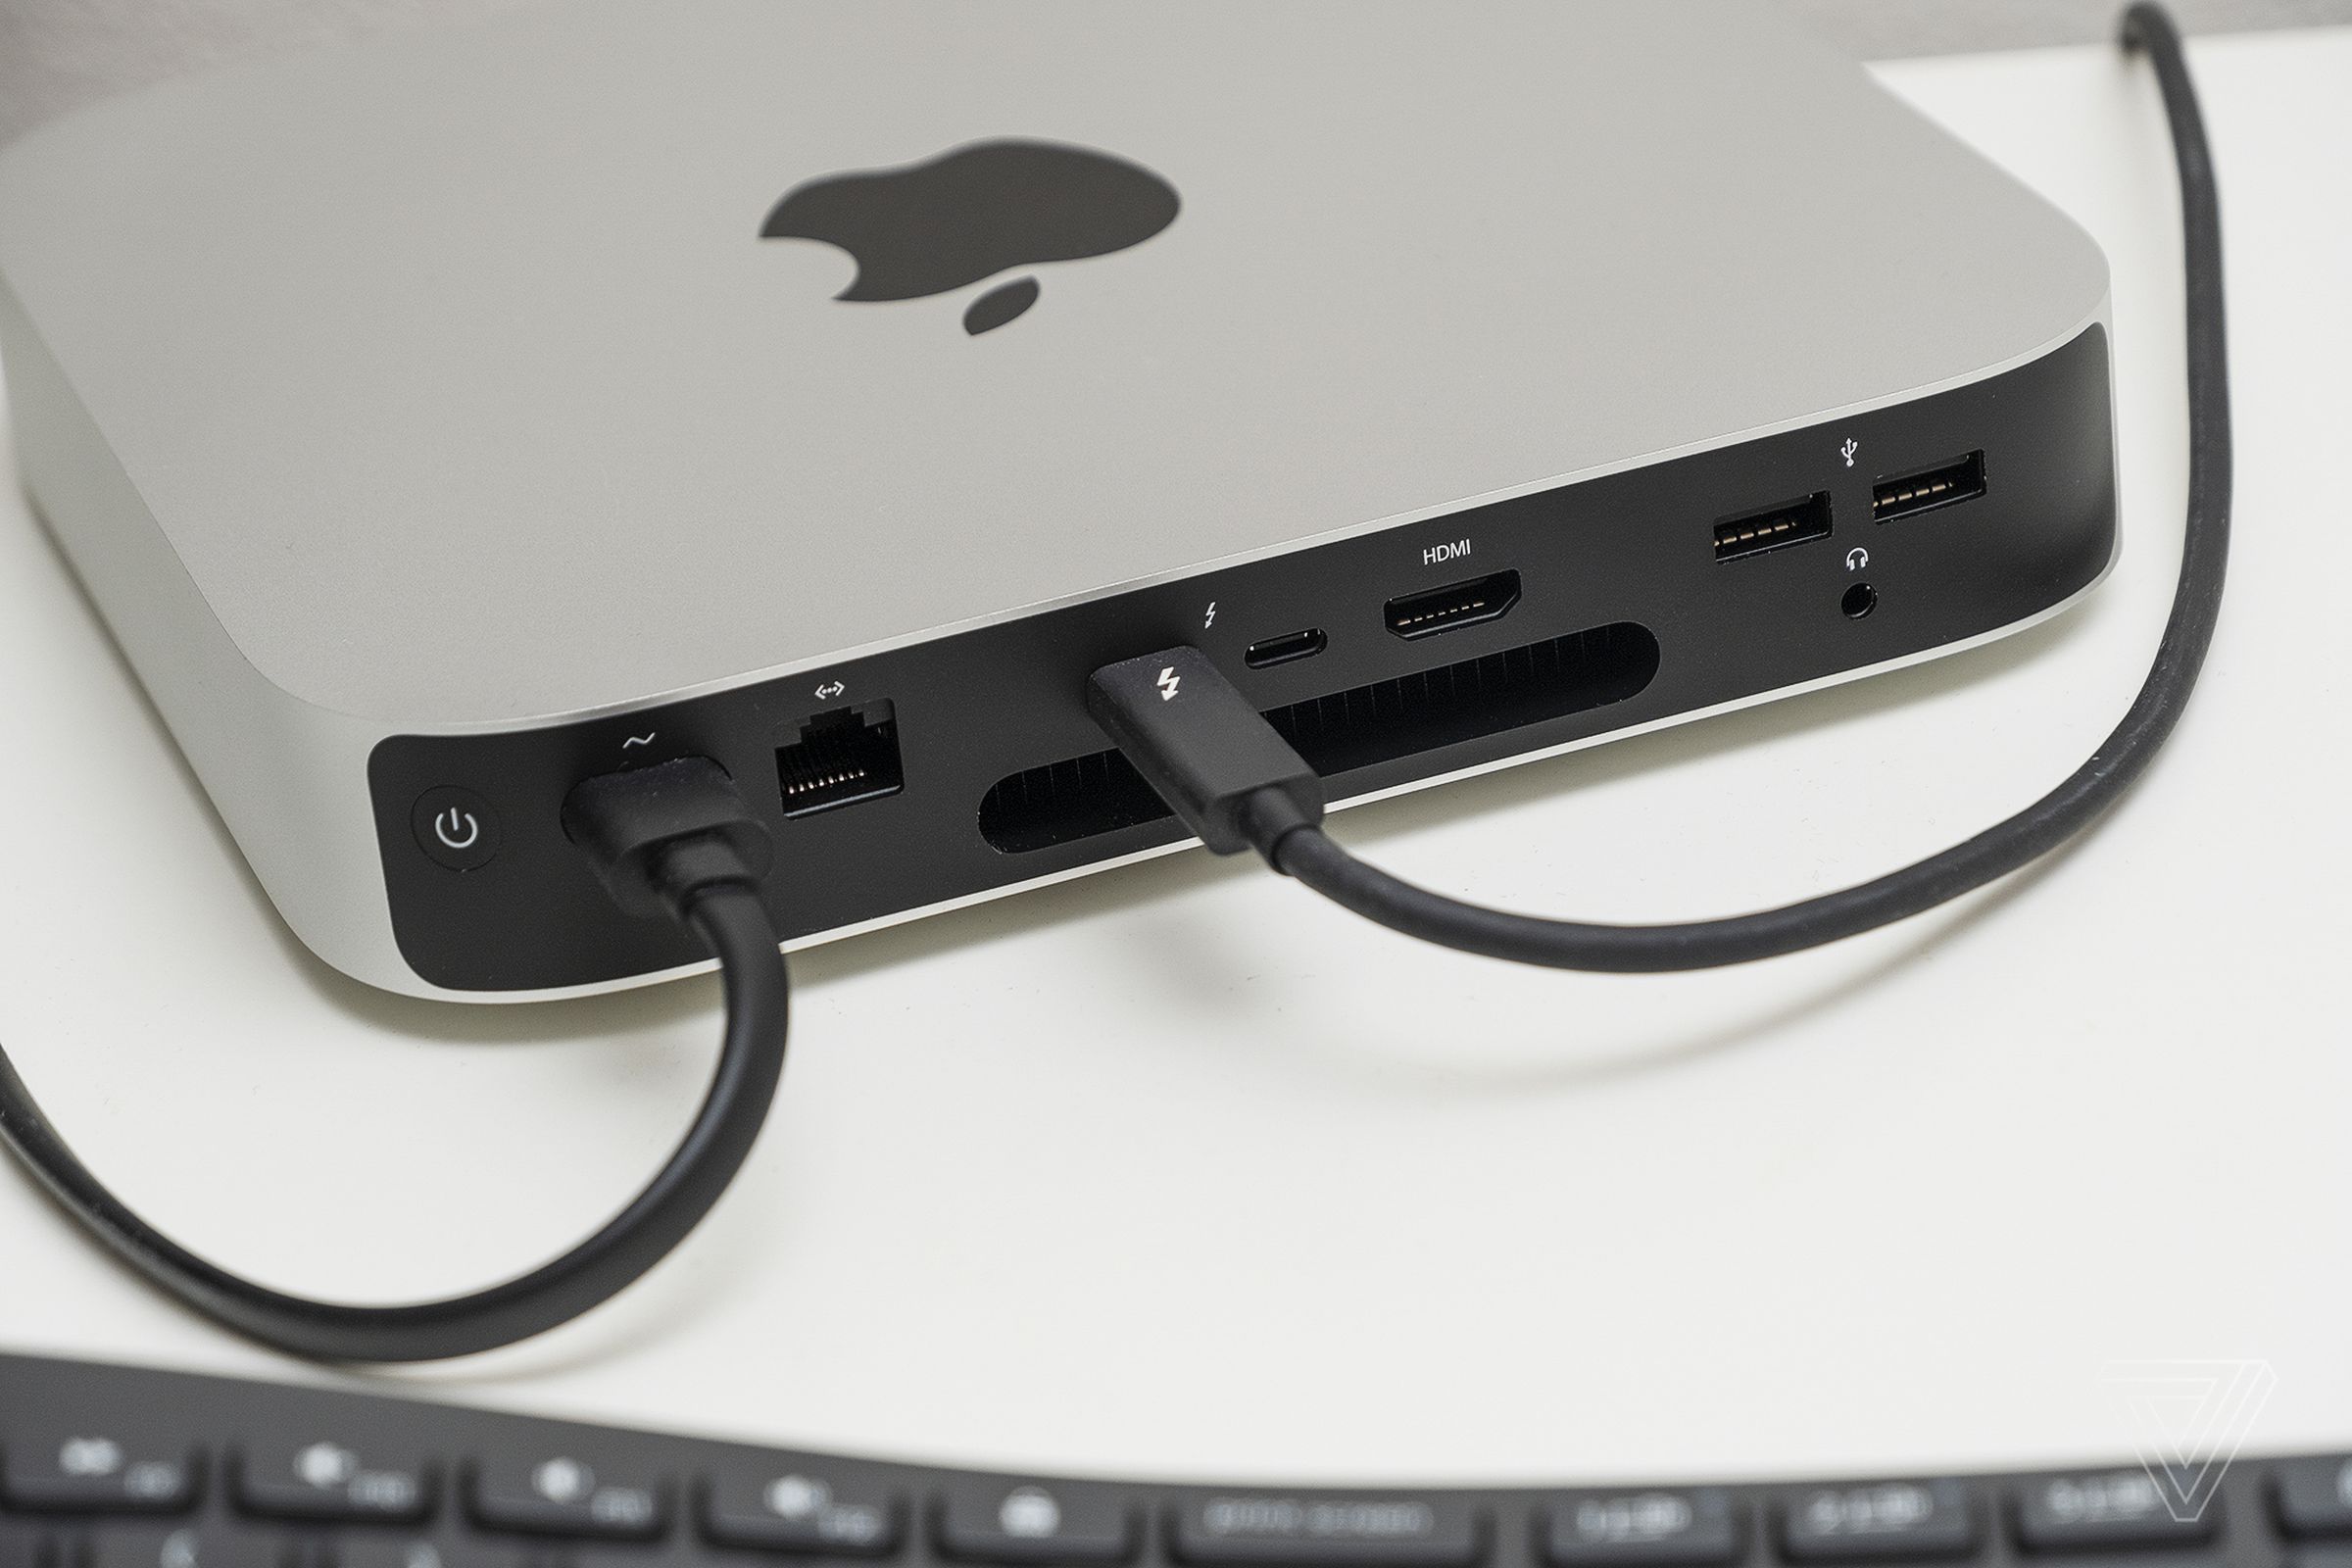 The port configuration on the current M1 Mac Mini.